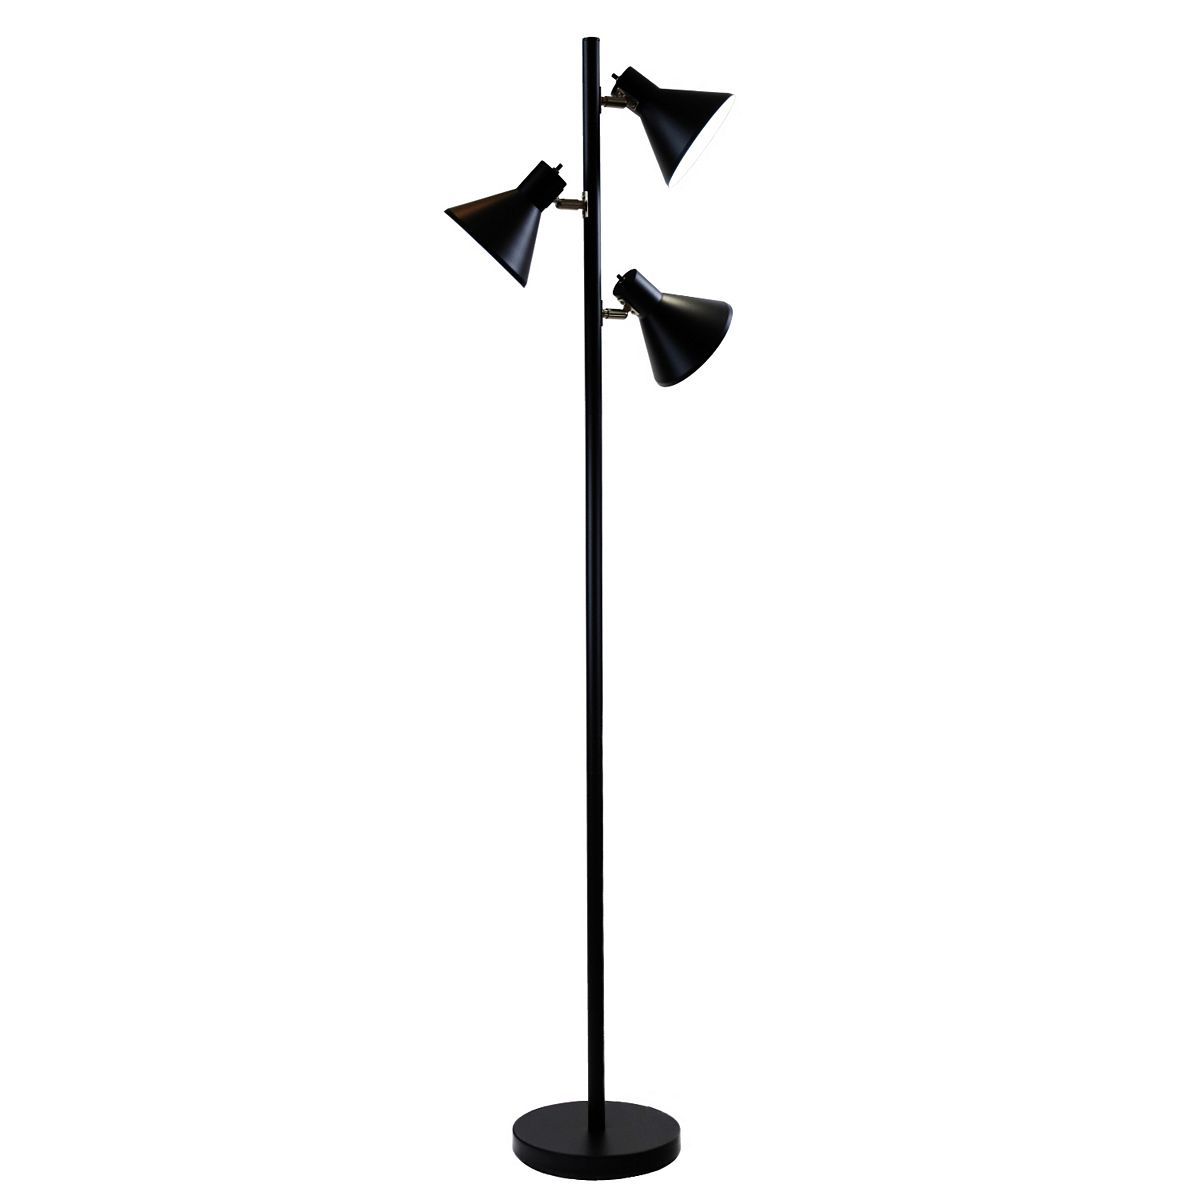 Dorm 3 Light Floor Lamp with 3 Adjustable Reading Room Lights by Lightaccents | Kohl's